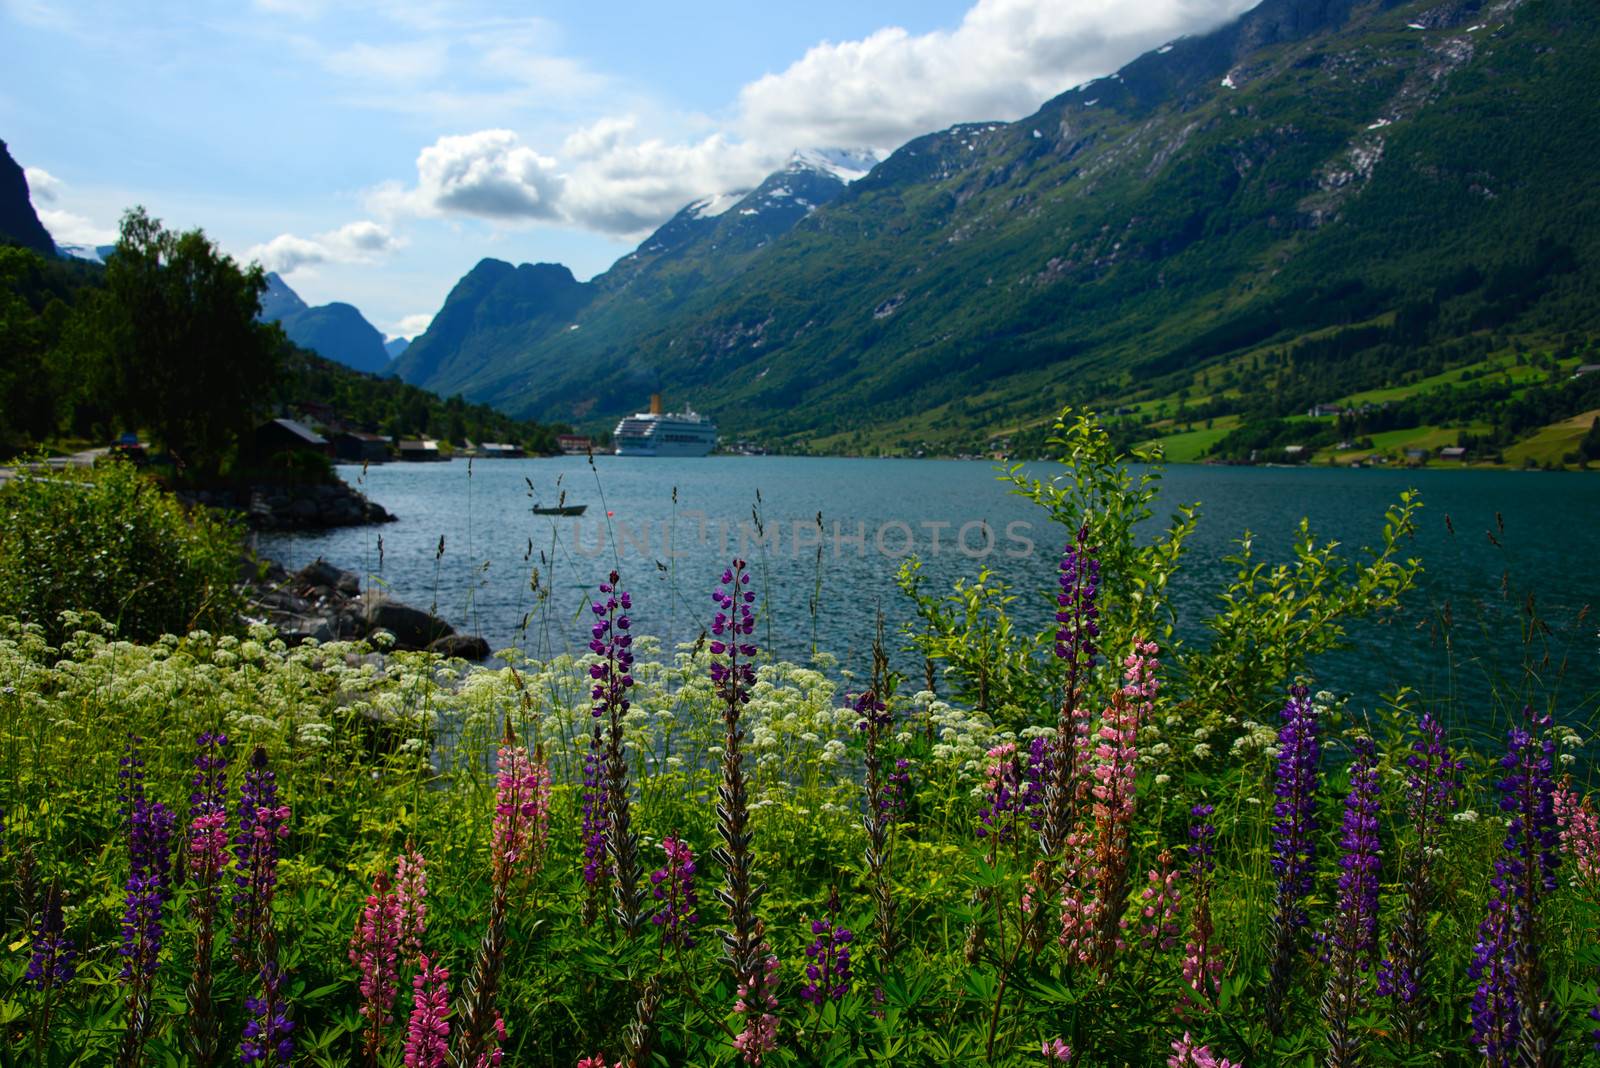 A typical scene from the Norwegian fjords during the summer with wildflowers, mountains, sunshine and a cruise ship in the distance.